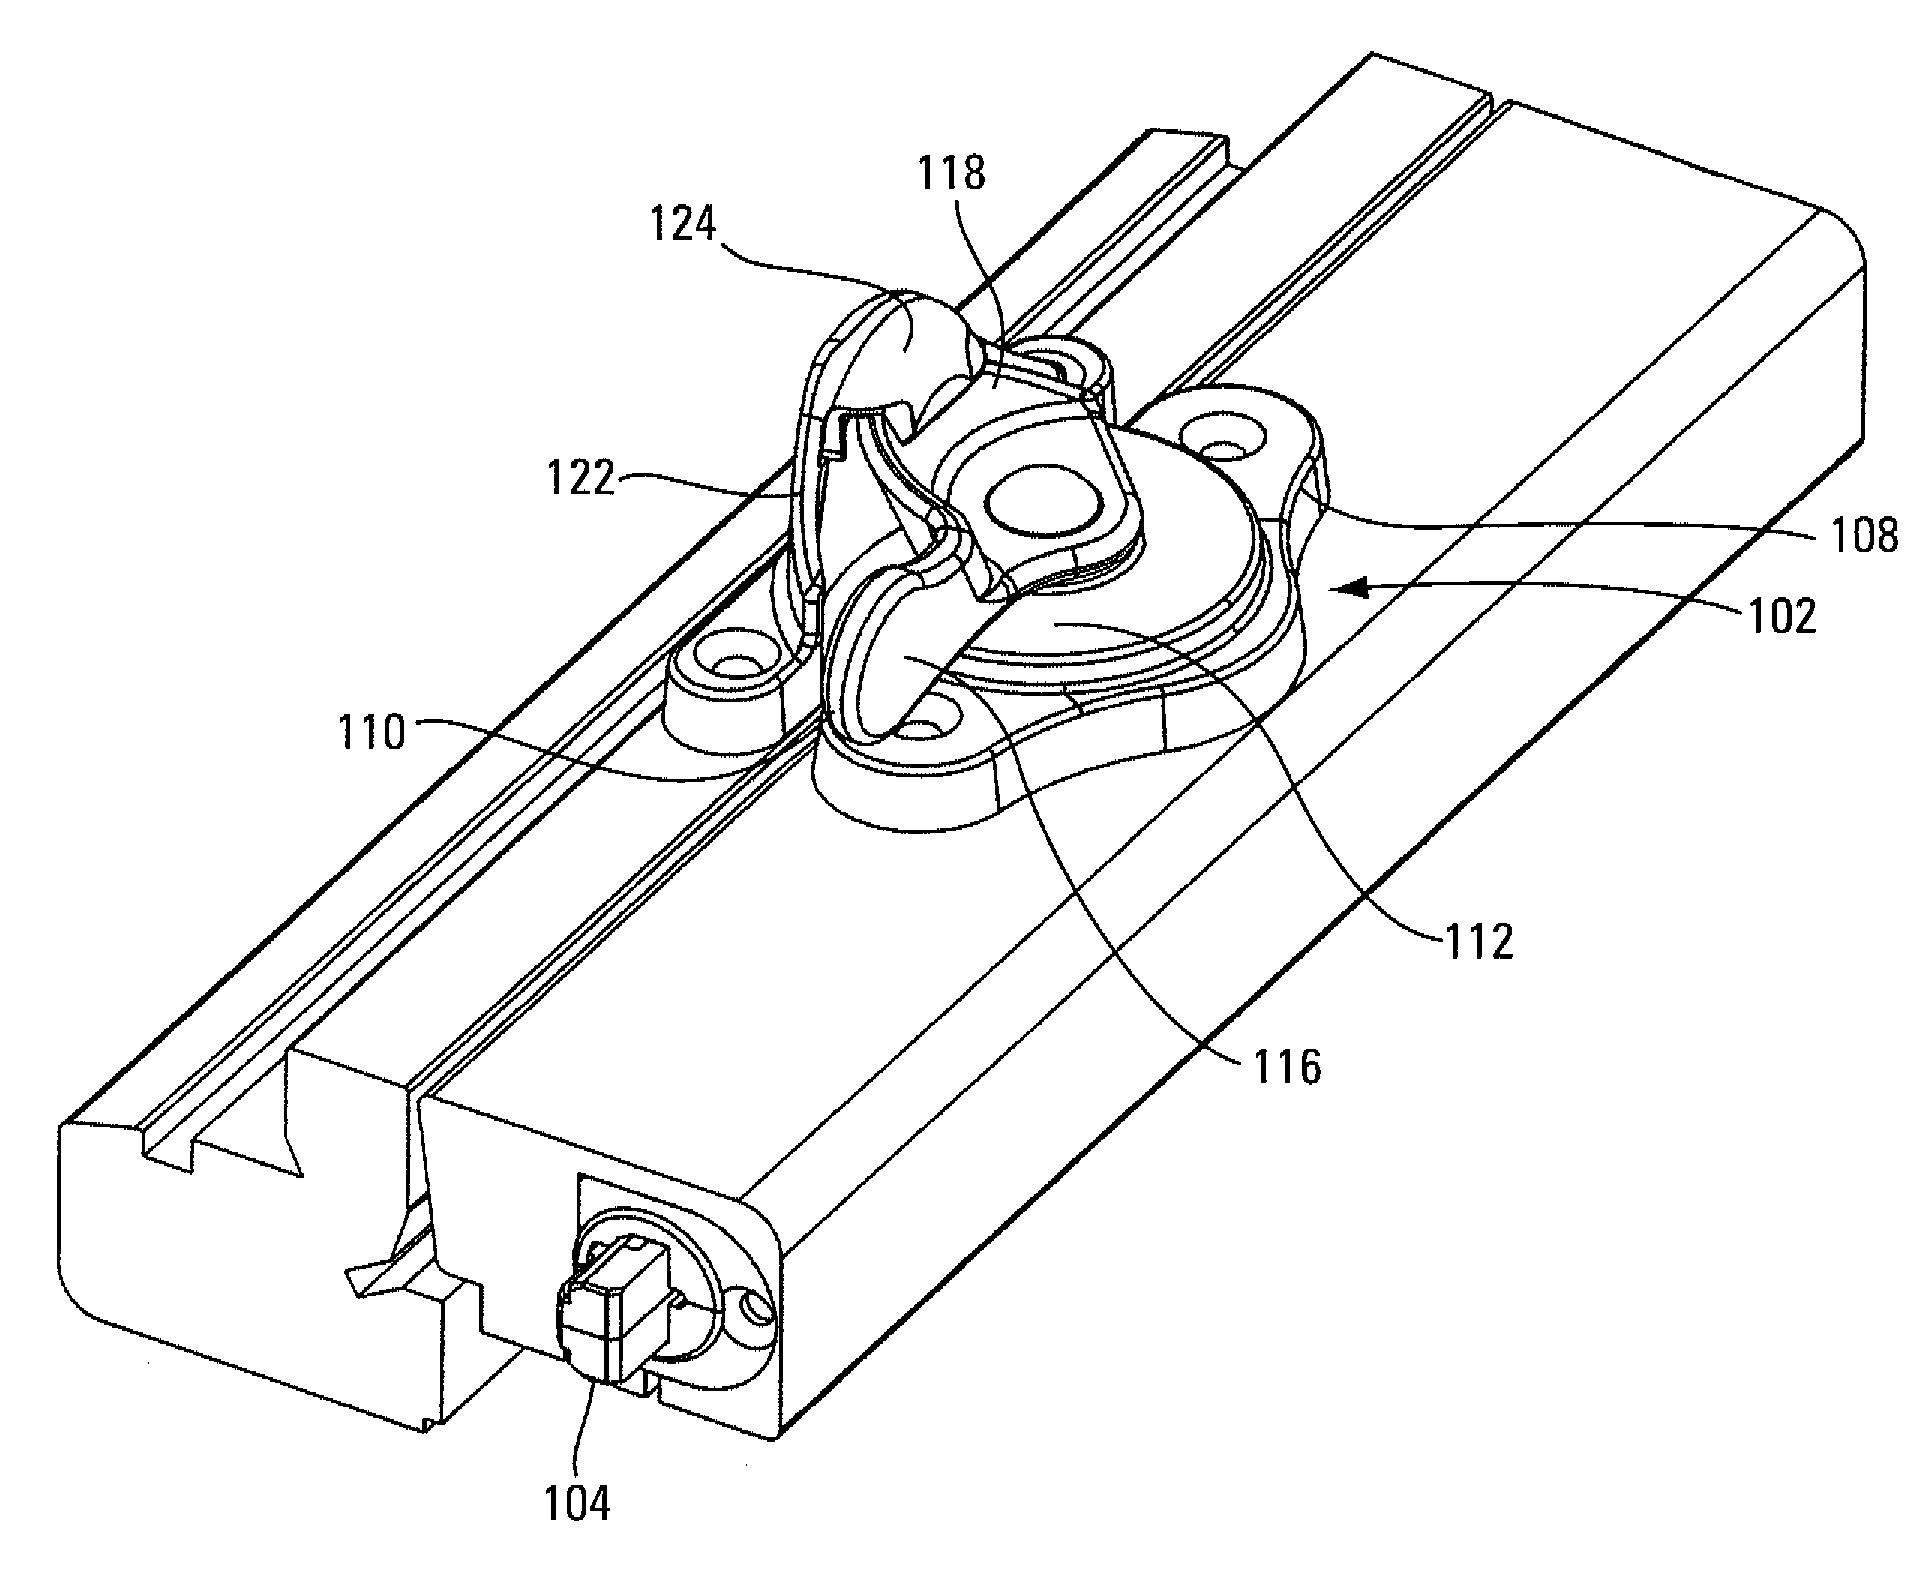 Integrated lock and tilt-latch mechanism for a sliding window